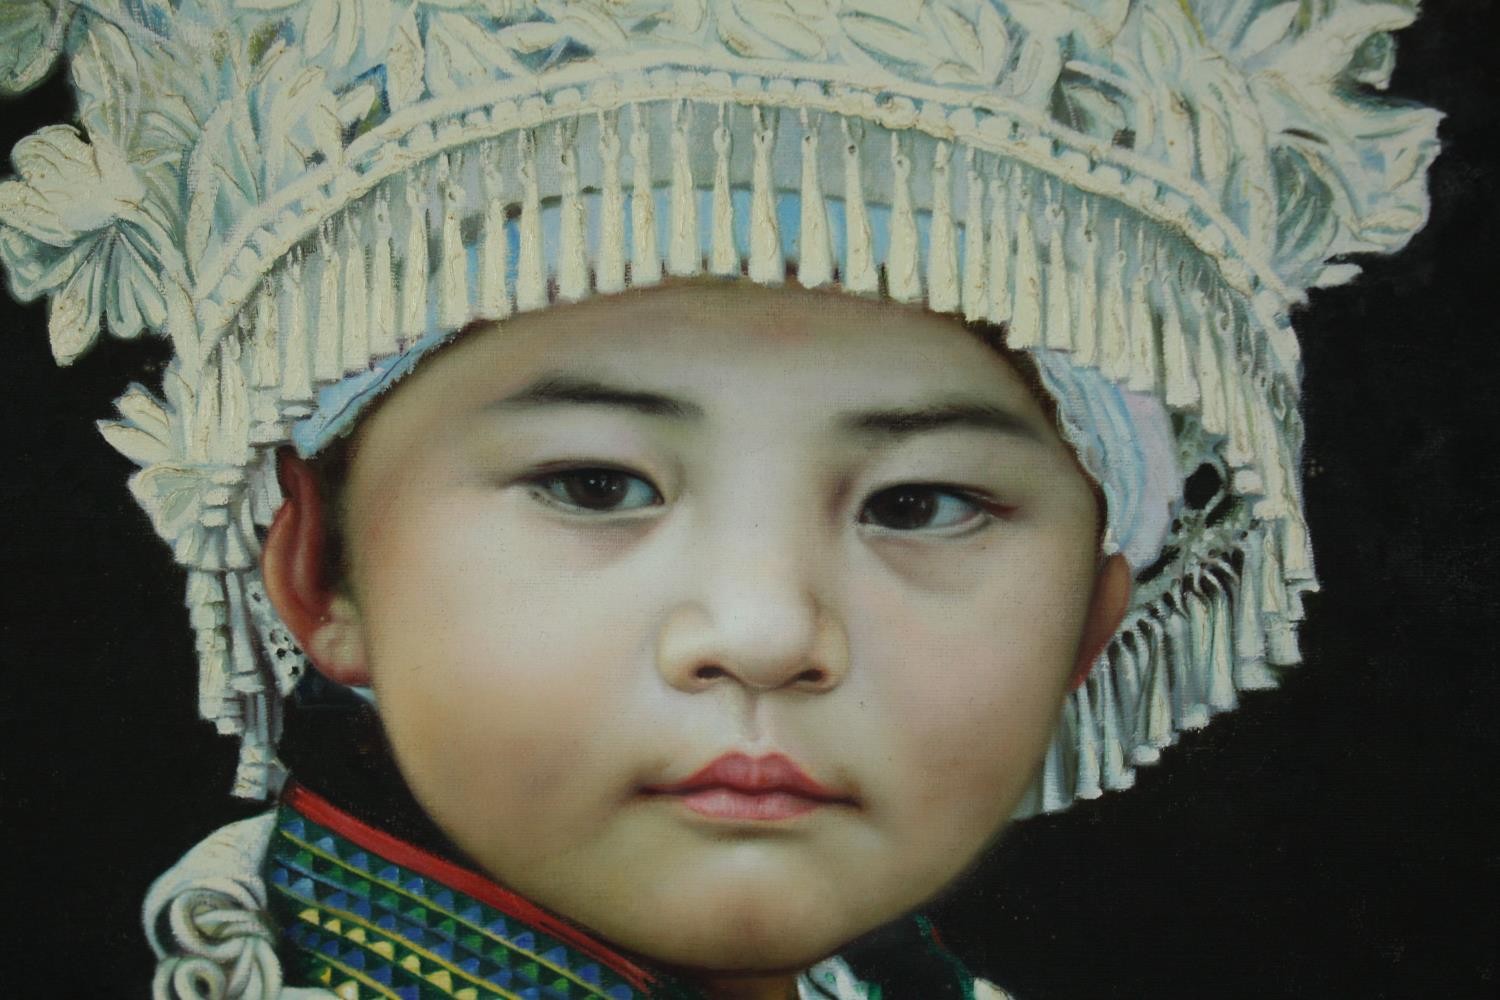 Oil on canvas, portrait of a young Eastern girl in a Hmong Miao headdress, within a hardwood